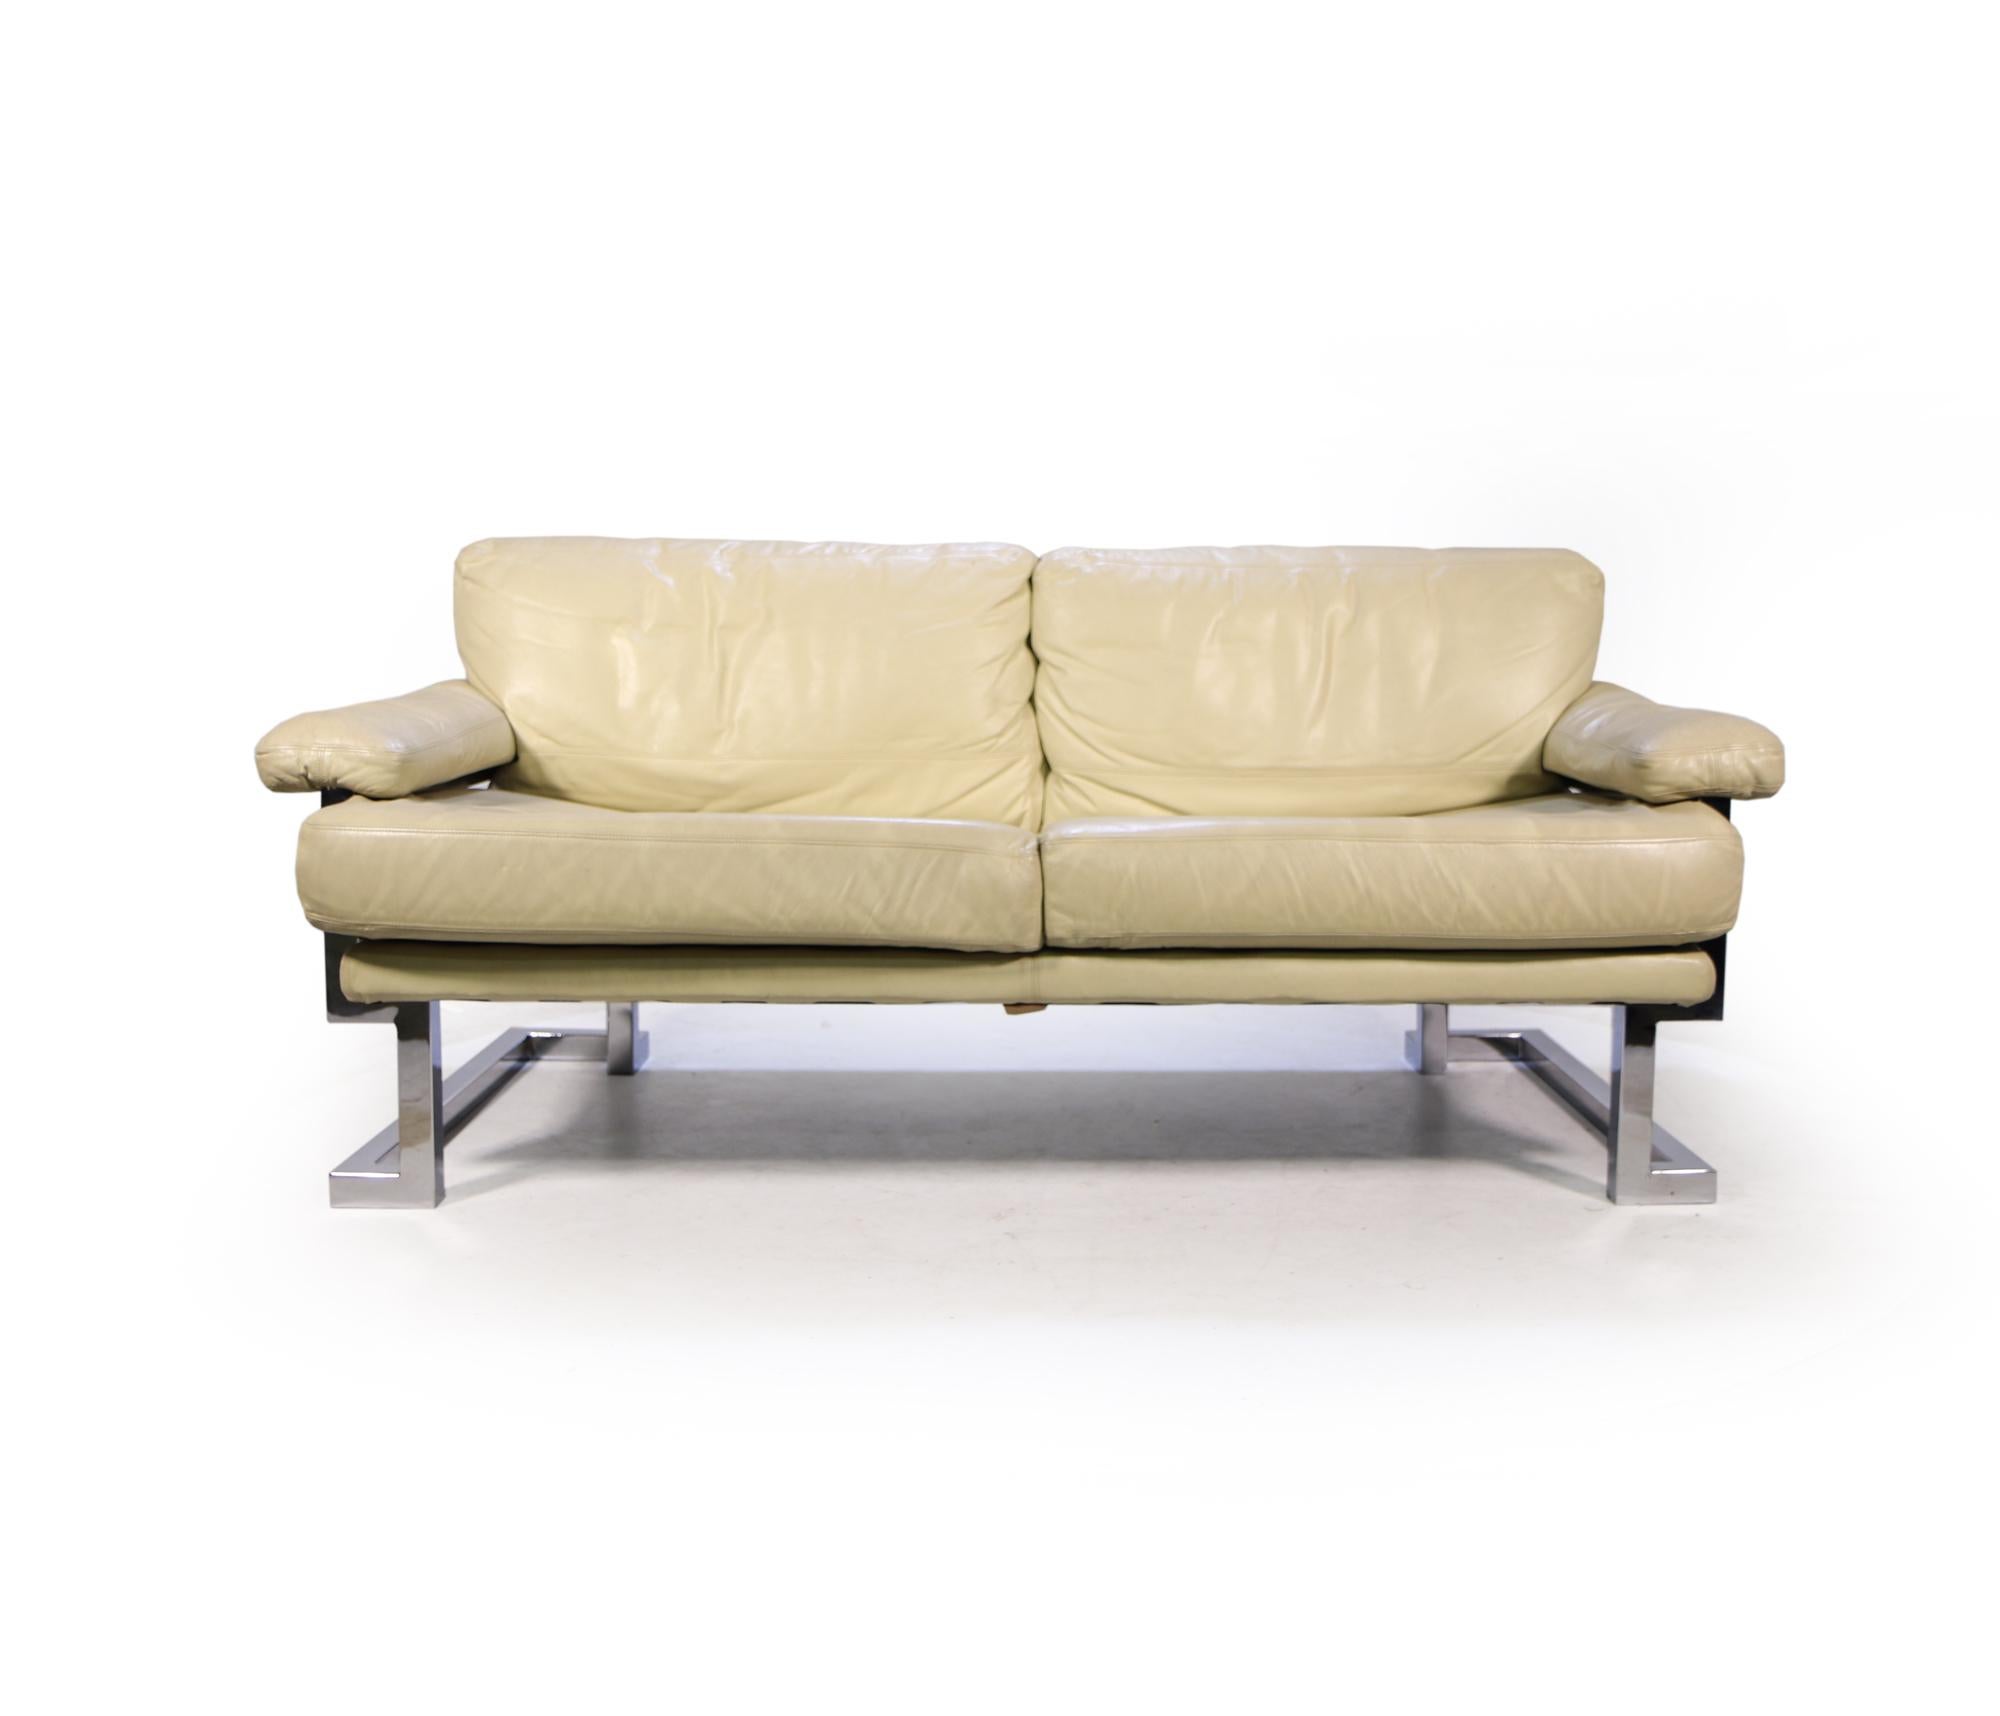 Pieff Mandarin Two Seat Sofa in Cream Leather and Chrome 4